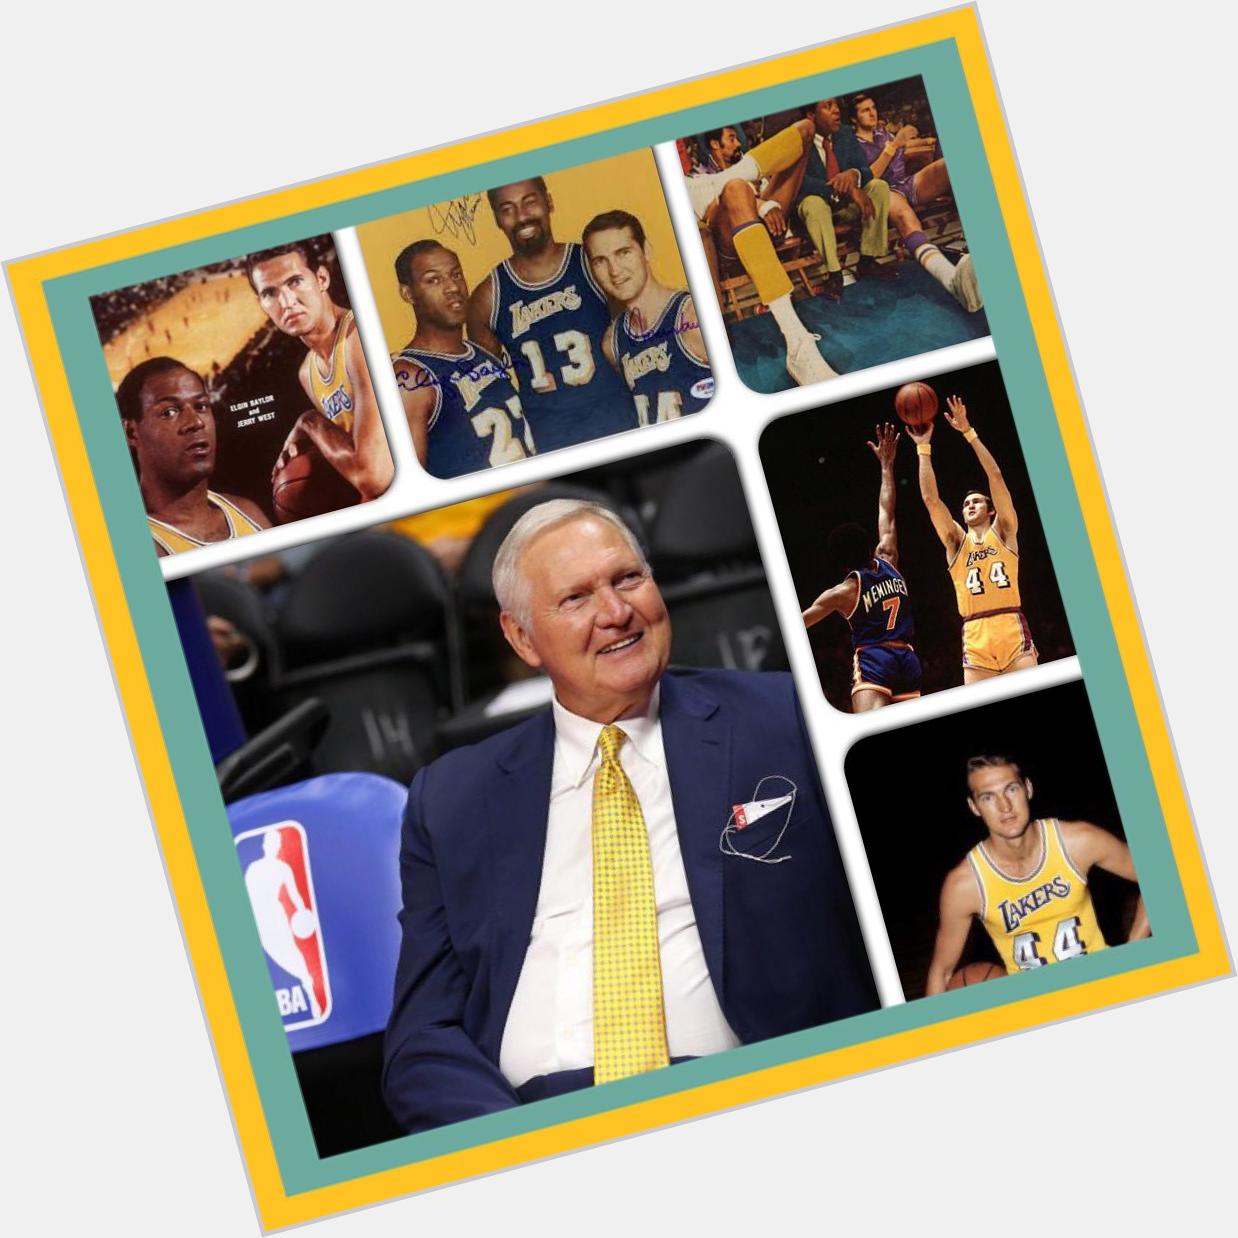 Happy birthday to Mr. Clutch, one of the best point guards in history, Jerry West, who turns 77 today! 